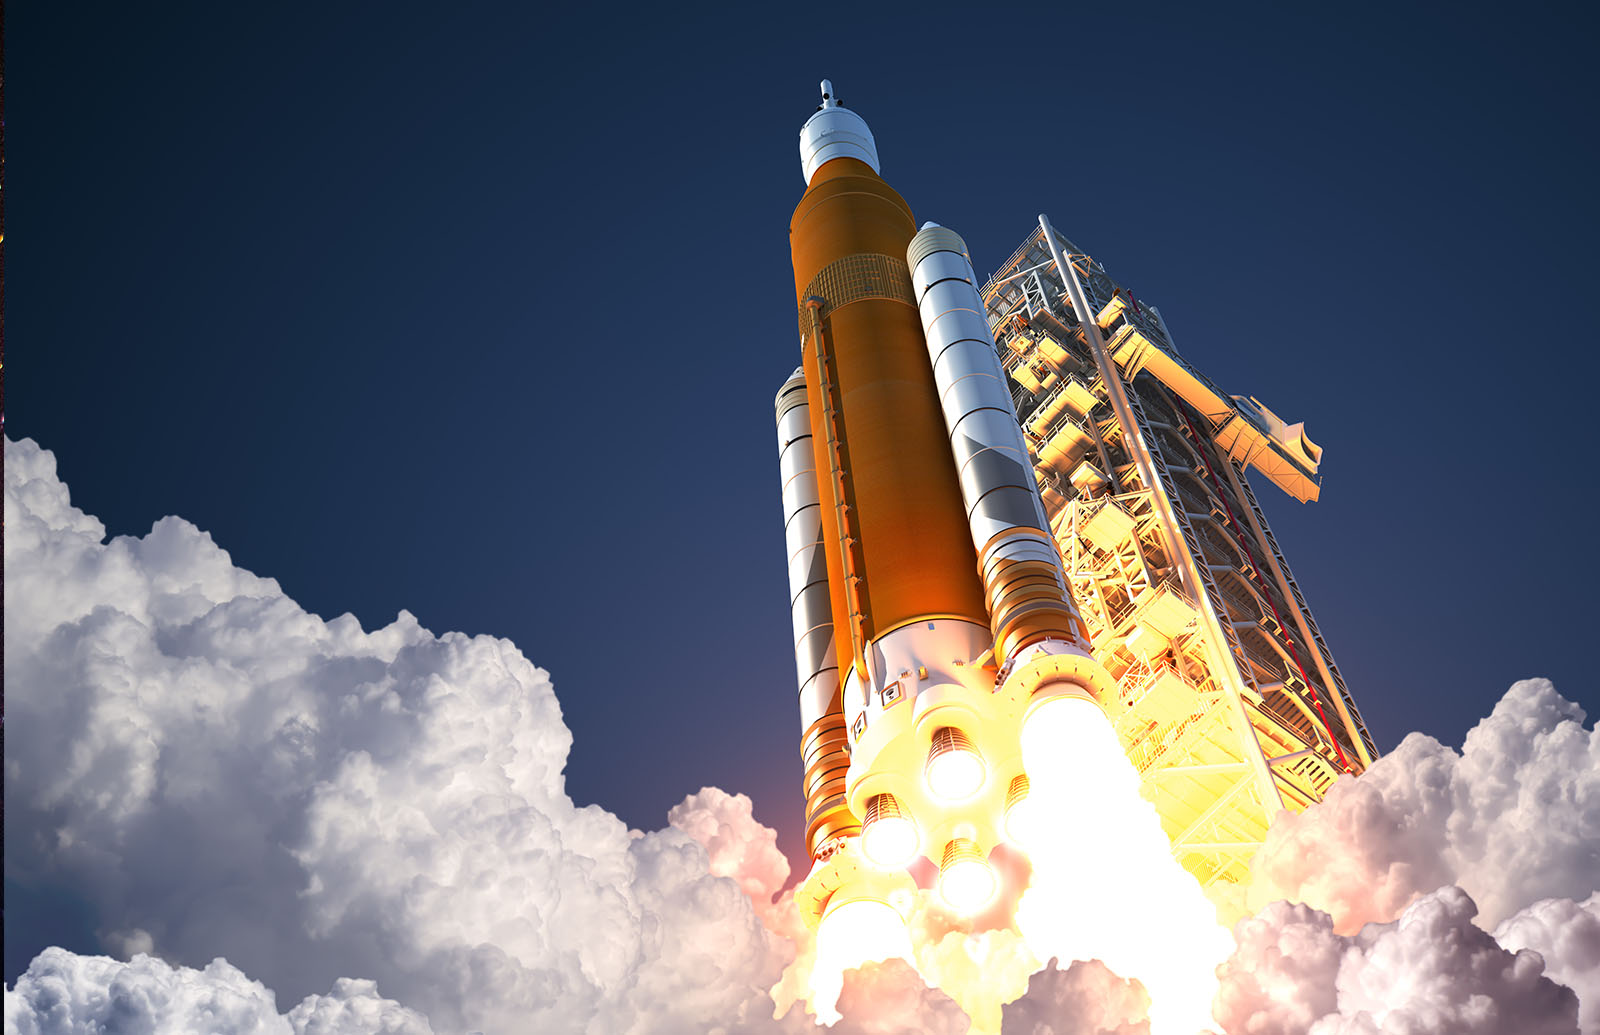 To allow for repairs, NASA has delayed the launch of its SLS rocket